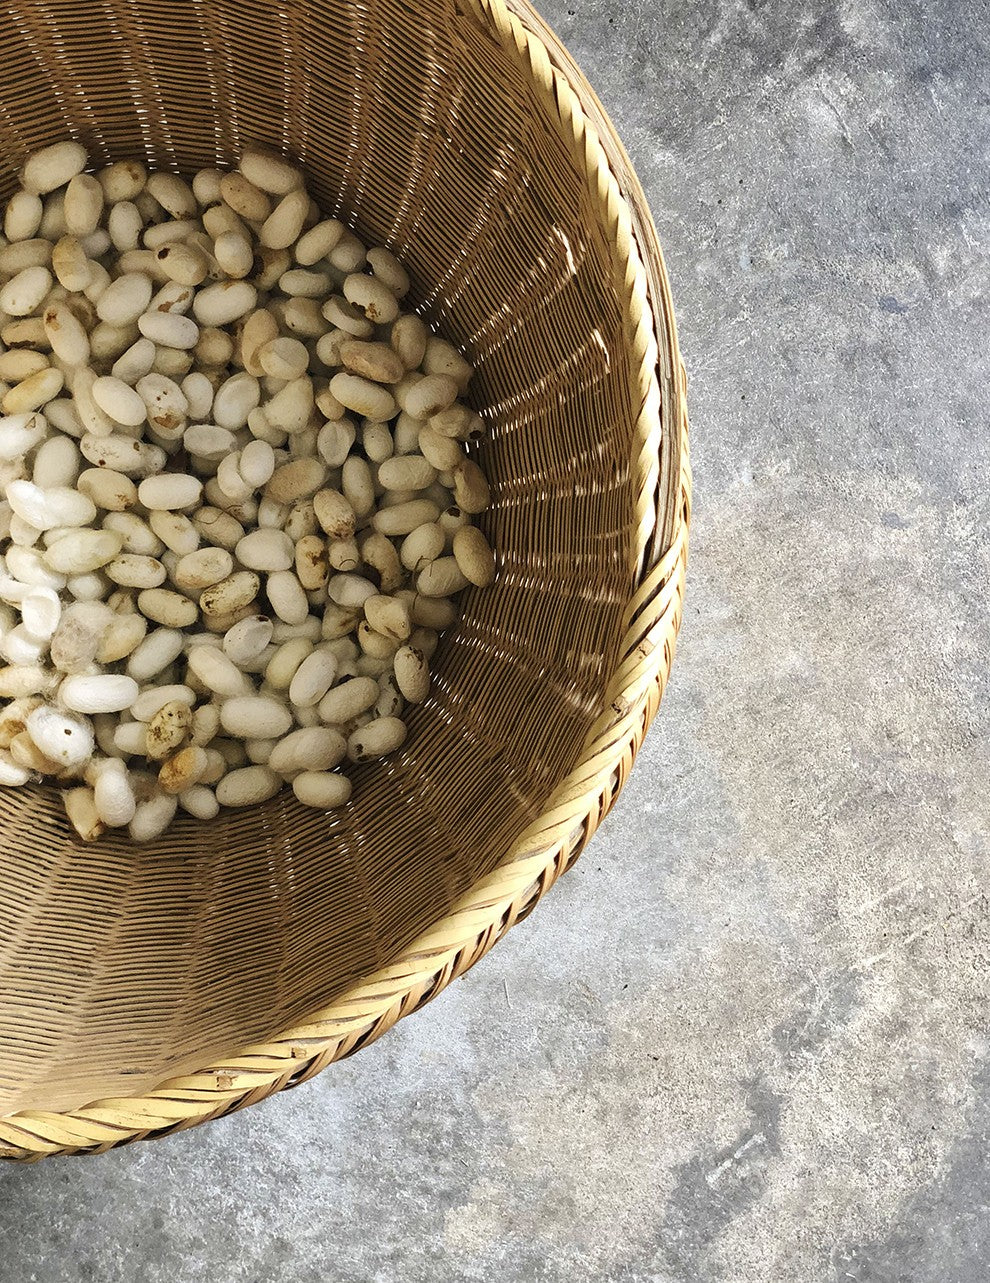 Top view of a basket filled with beans placed on a textured surface.